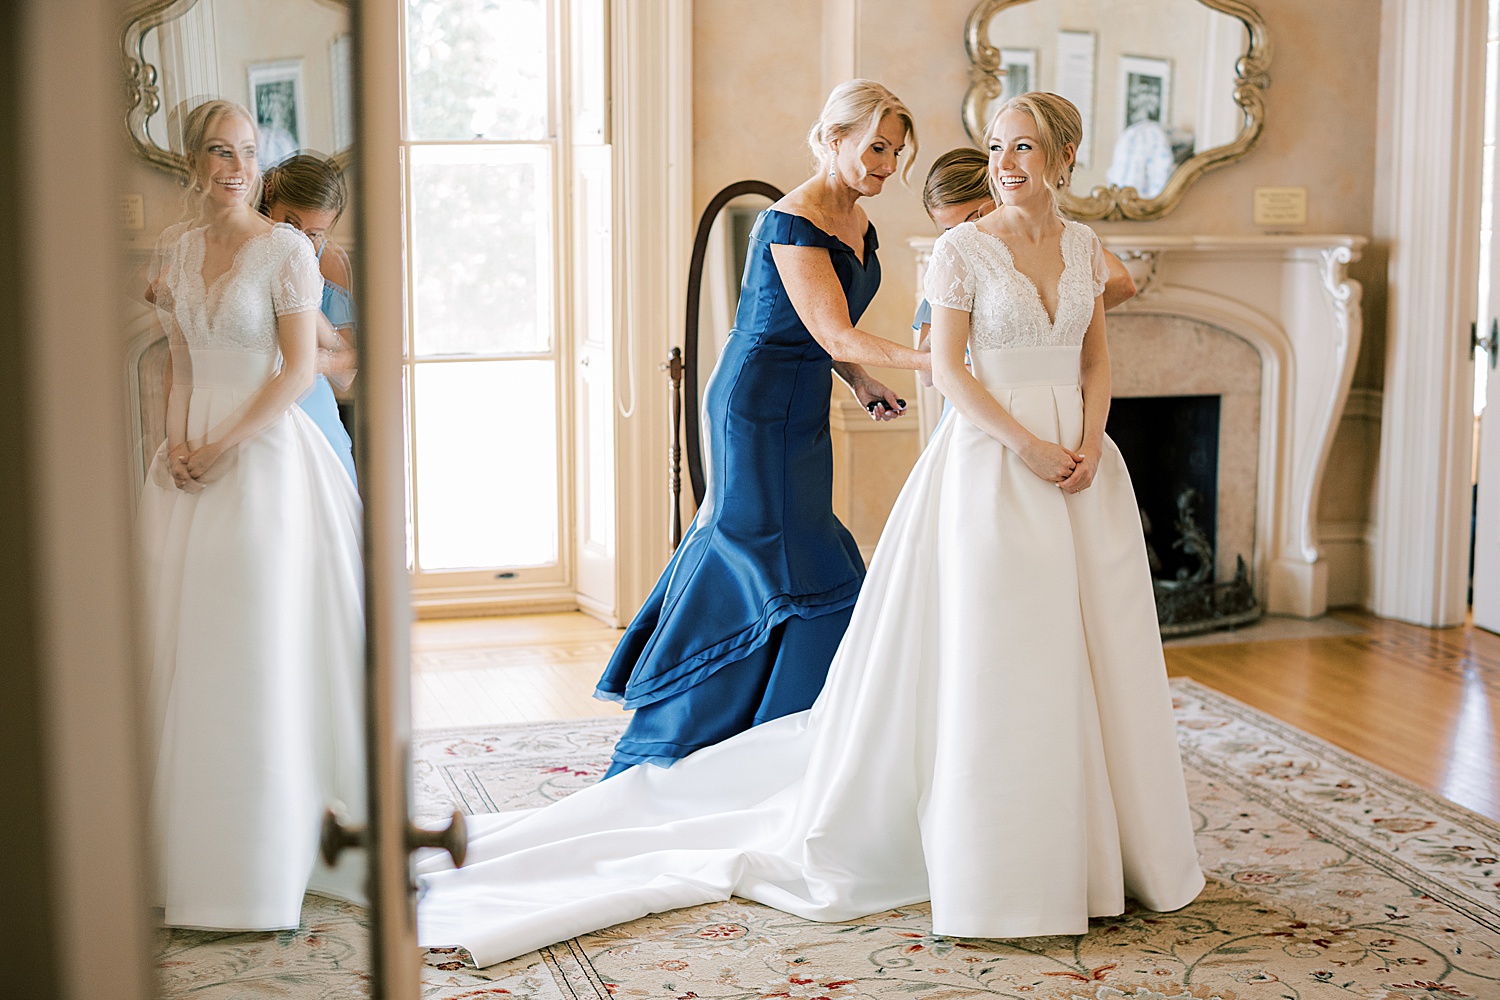 mother in navy gown helps bride into classic wedding dress 